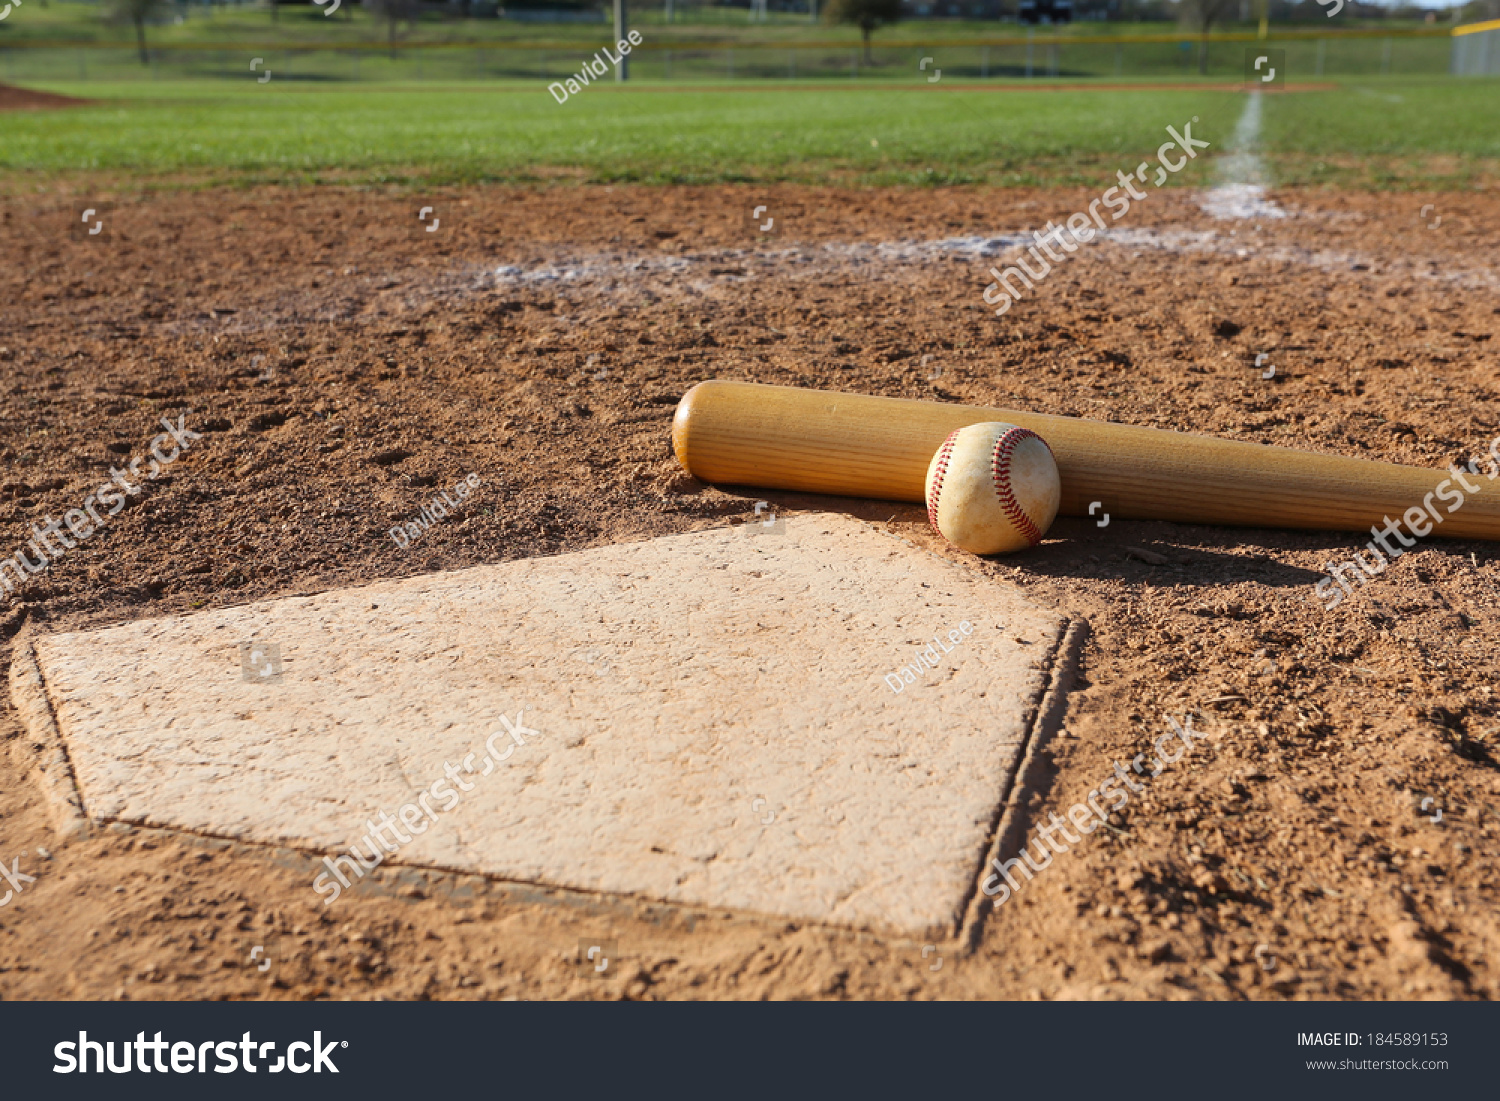 Baseball and Bat at Home Plate with the Field Beyond #184589153